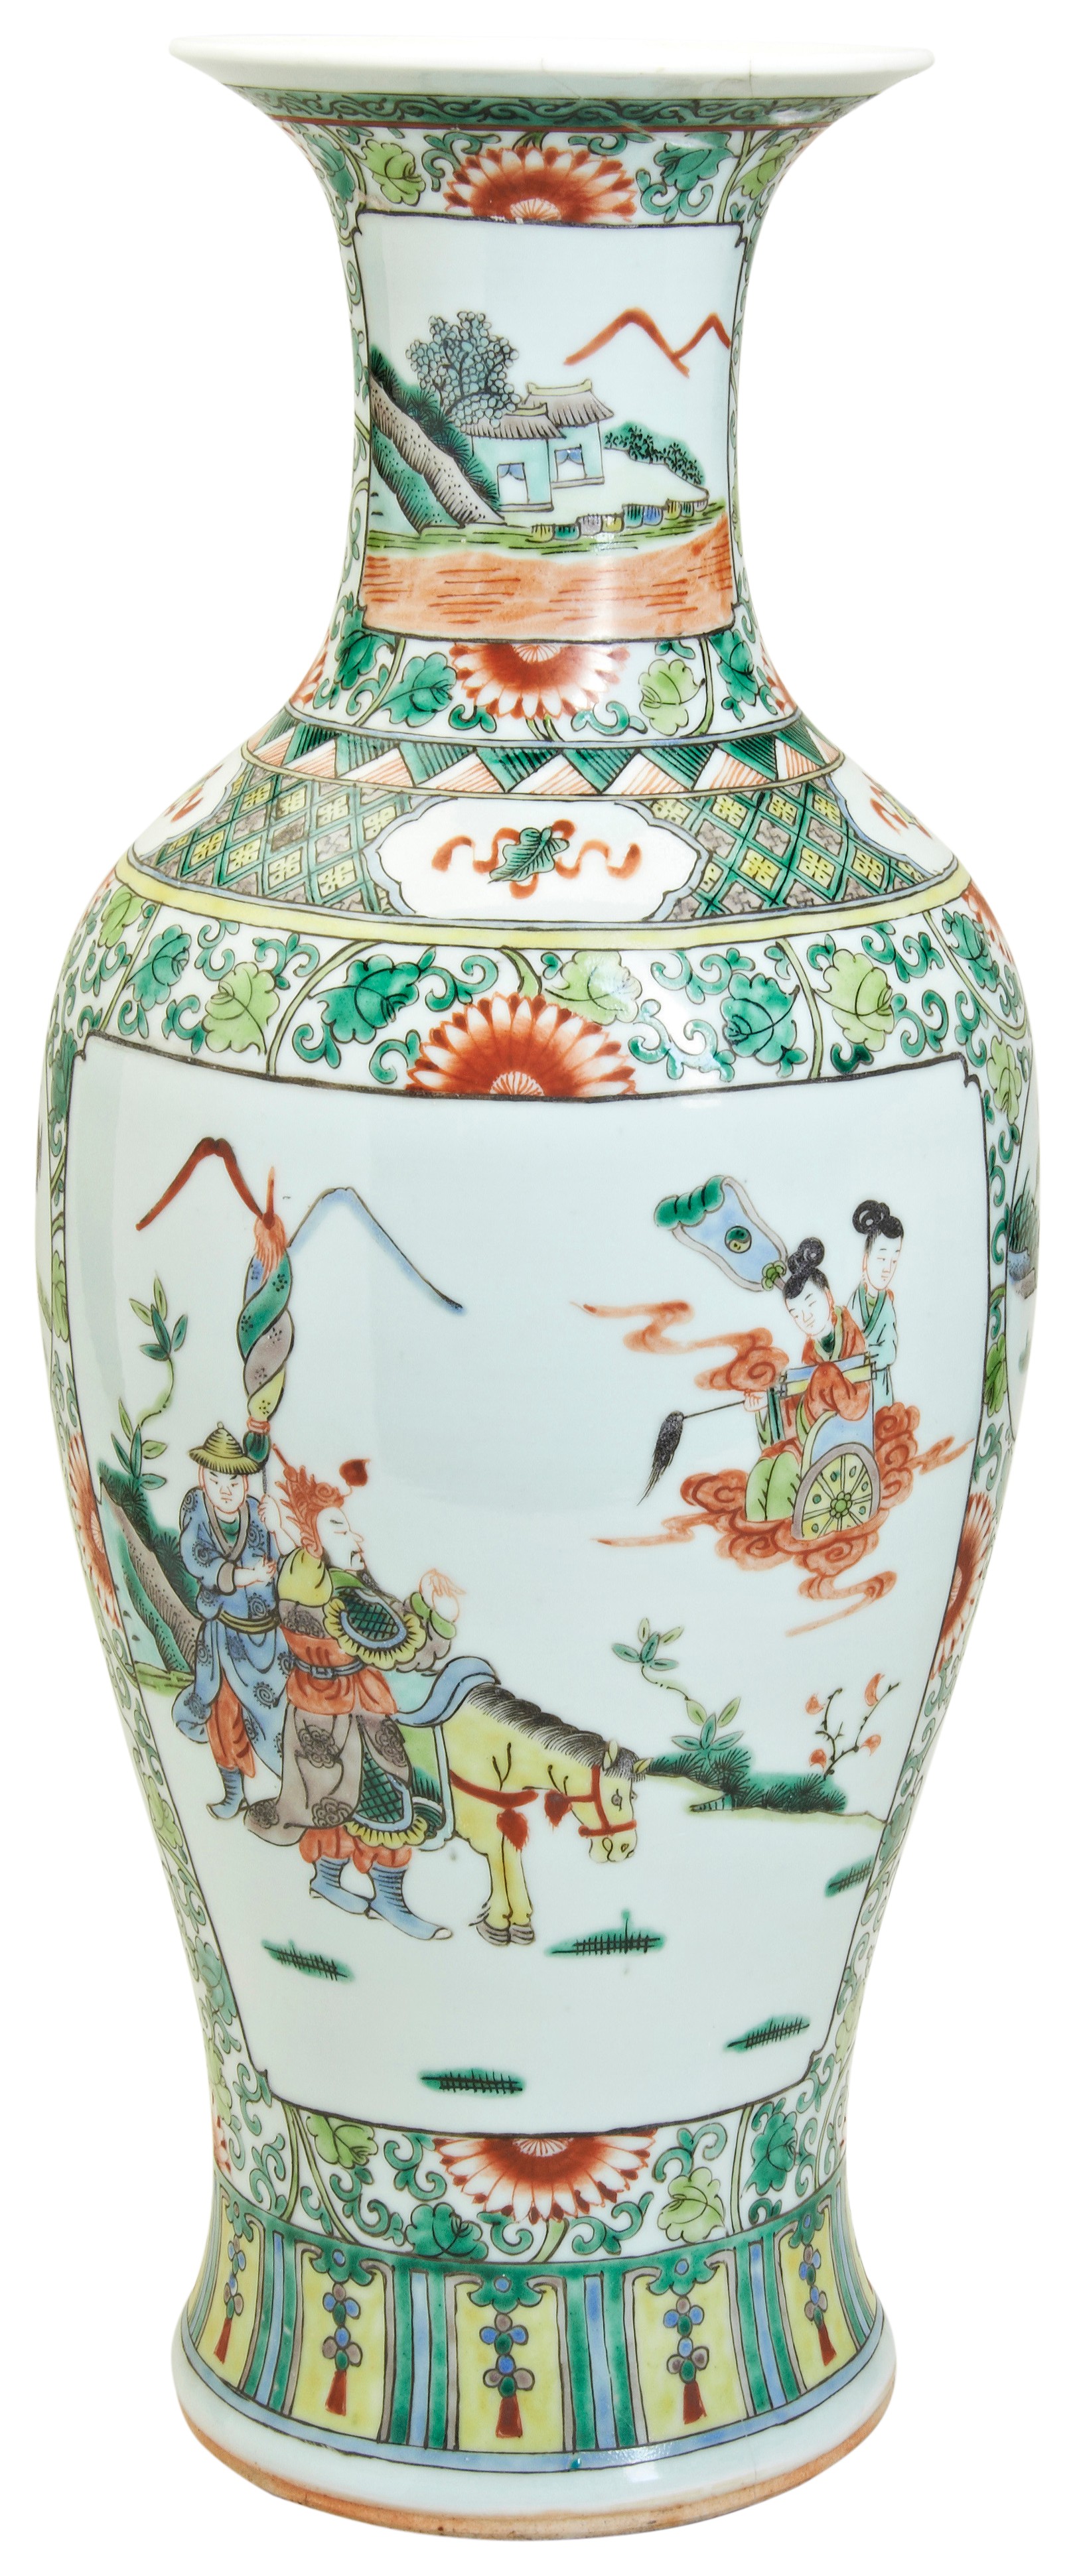 A LARGE FAMILLE VERTE BALUSTER VASE 19TH / 20TH CENTURY in the Kangxi style 59cm high